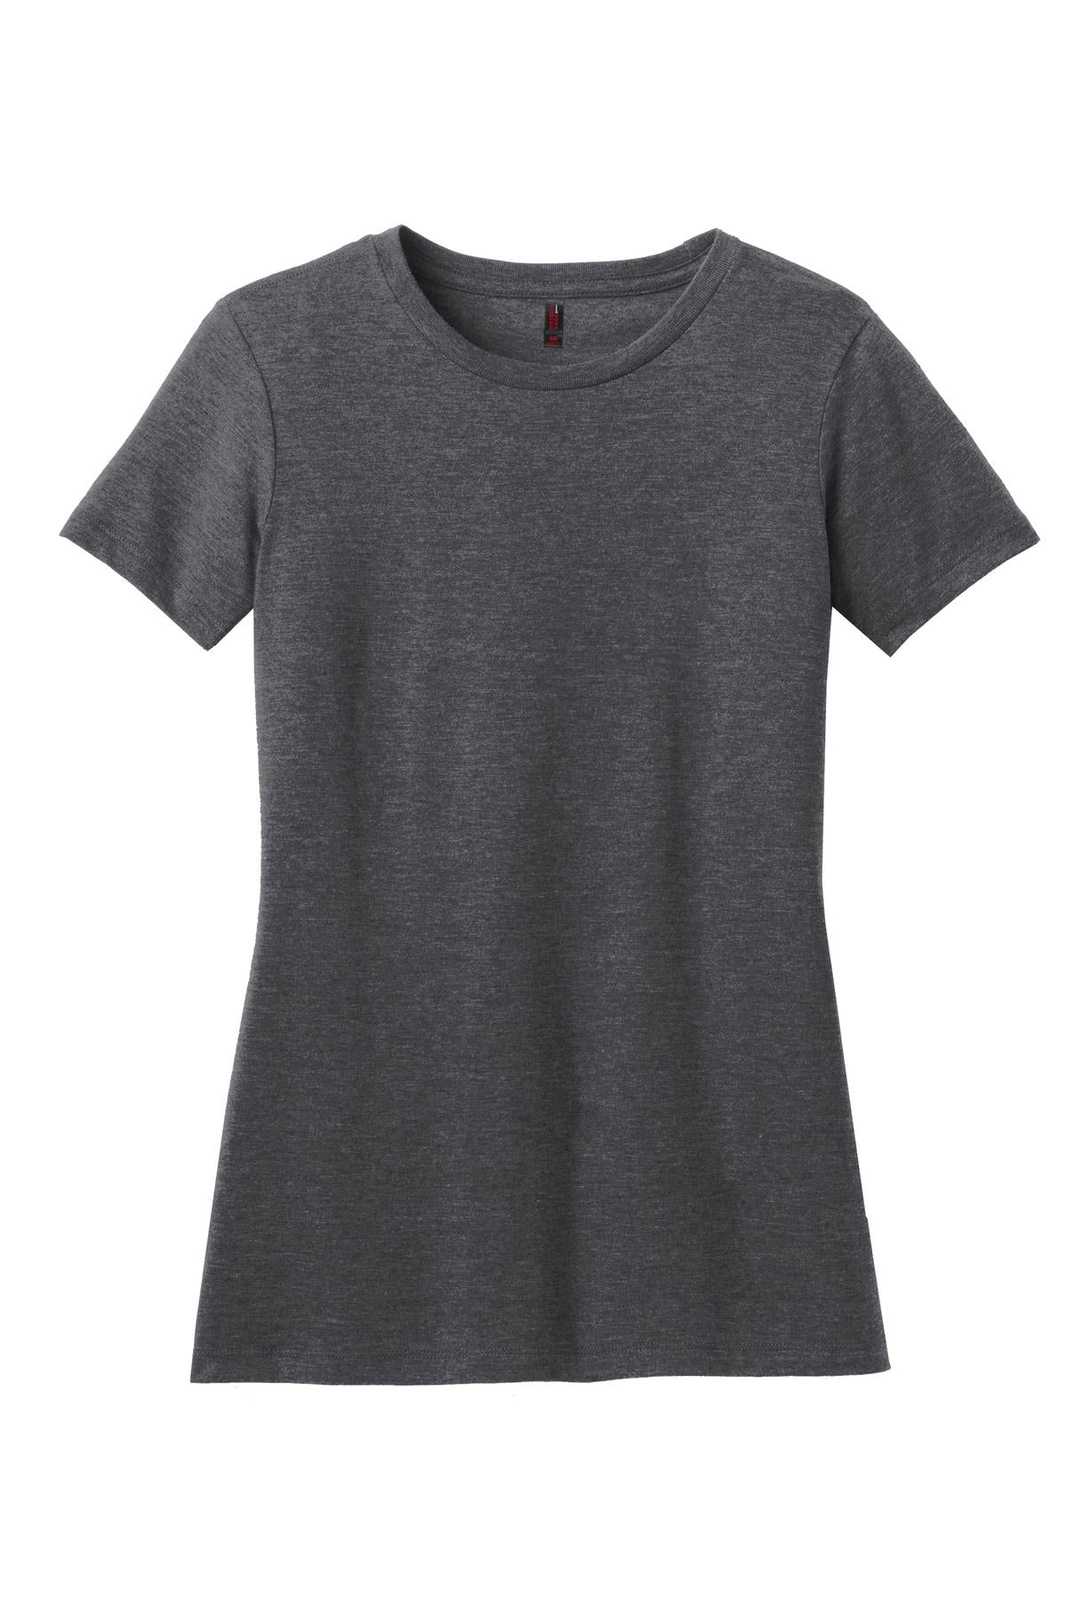 District DM108L Women's Perfect Blend Tee - Heathered Charcoal - HIT a Double - 1